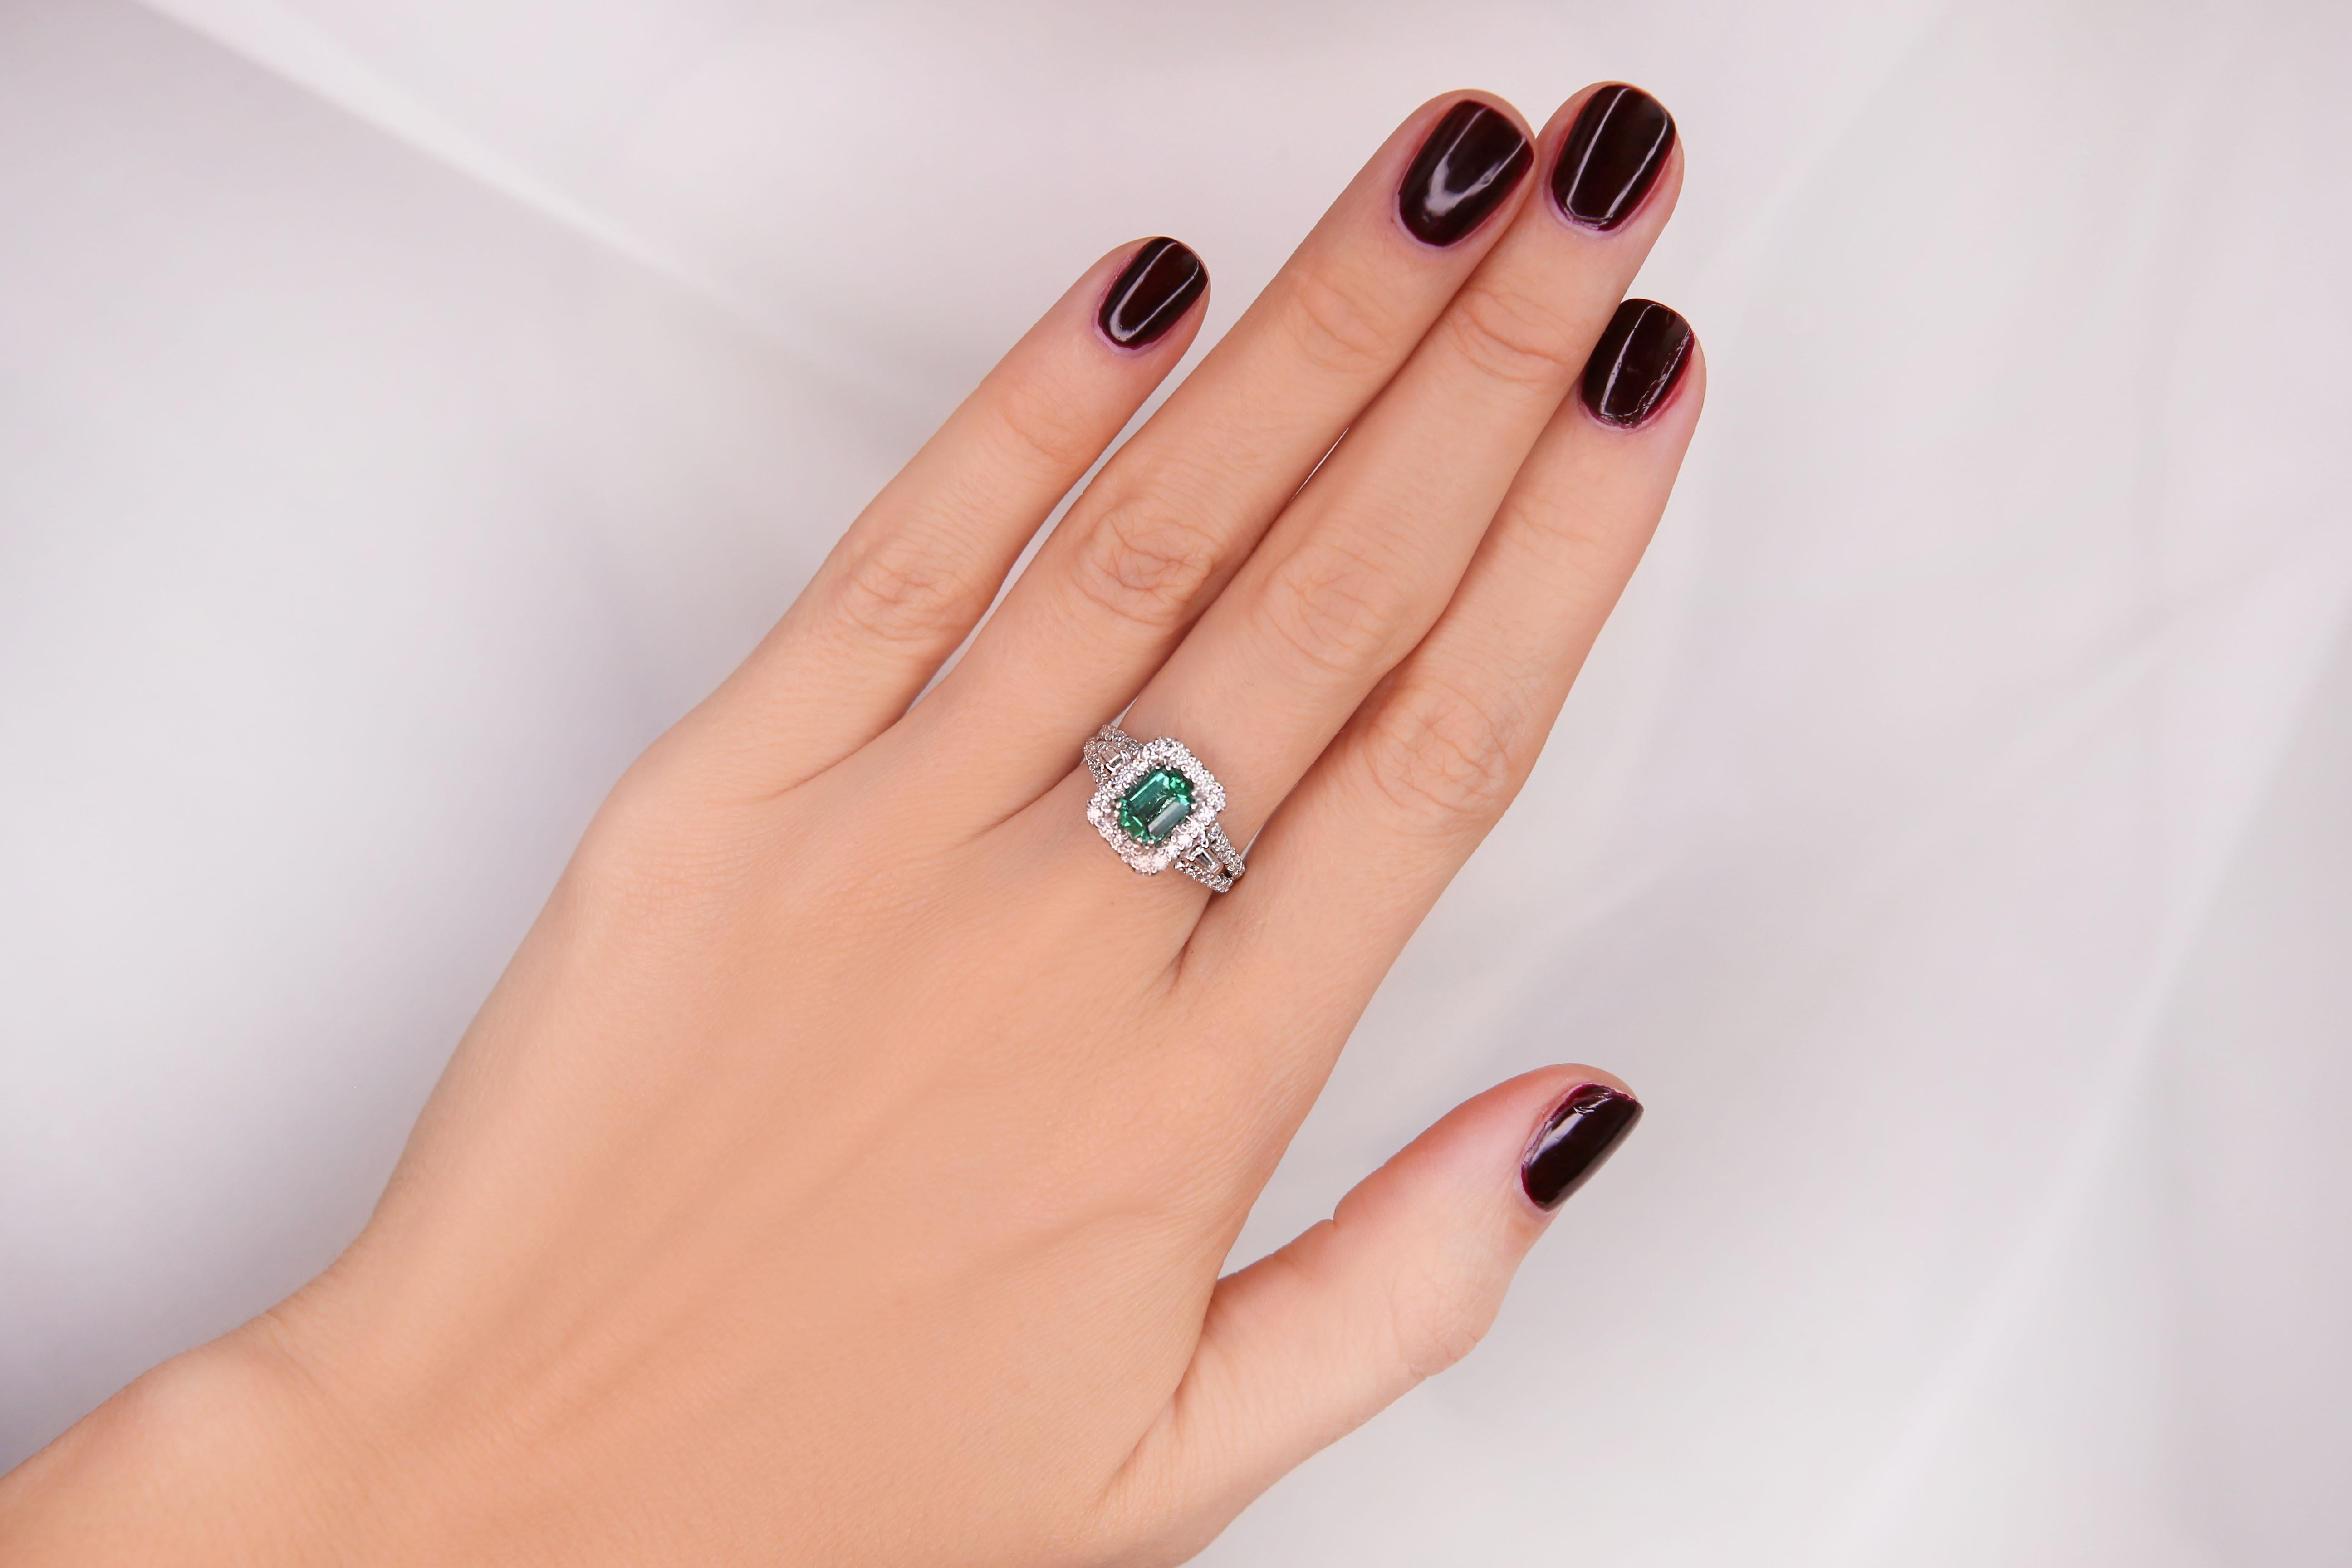 3.30 CTW Natural Emerald And Diamond Ring In 18K White Gold

Stamped: 18K
Ring Size: 6.25 Total Ring Weight: 7.5 Grams
Diamond Weight:
Total Natural diamond weight is 1.50carat.
SI1-SI2 clarity / G-H color
Gemstone Weight:
Total Natural Emerald